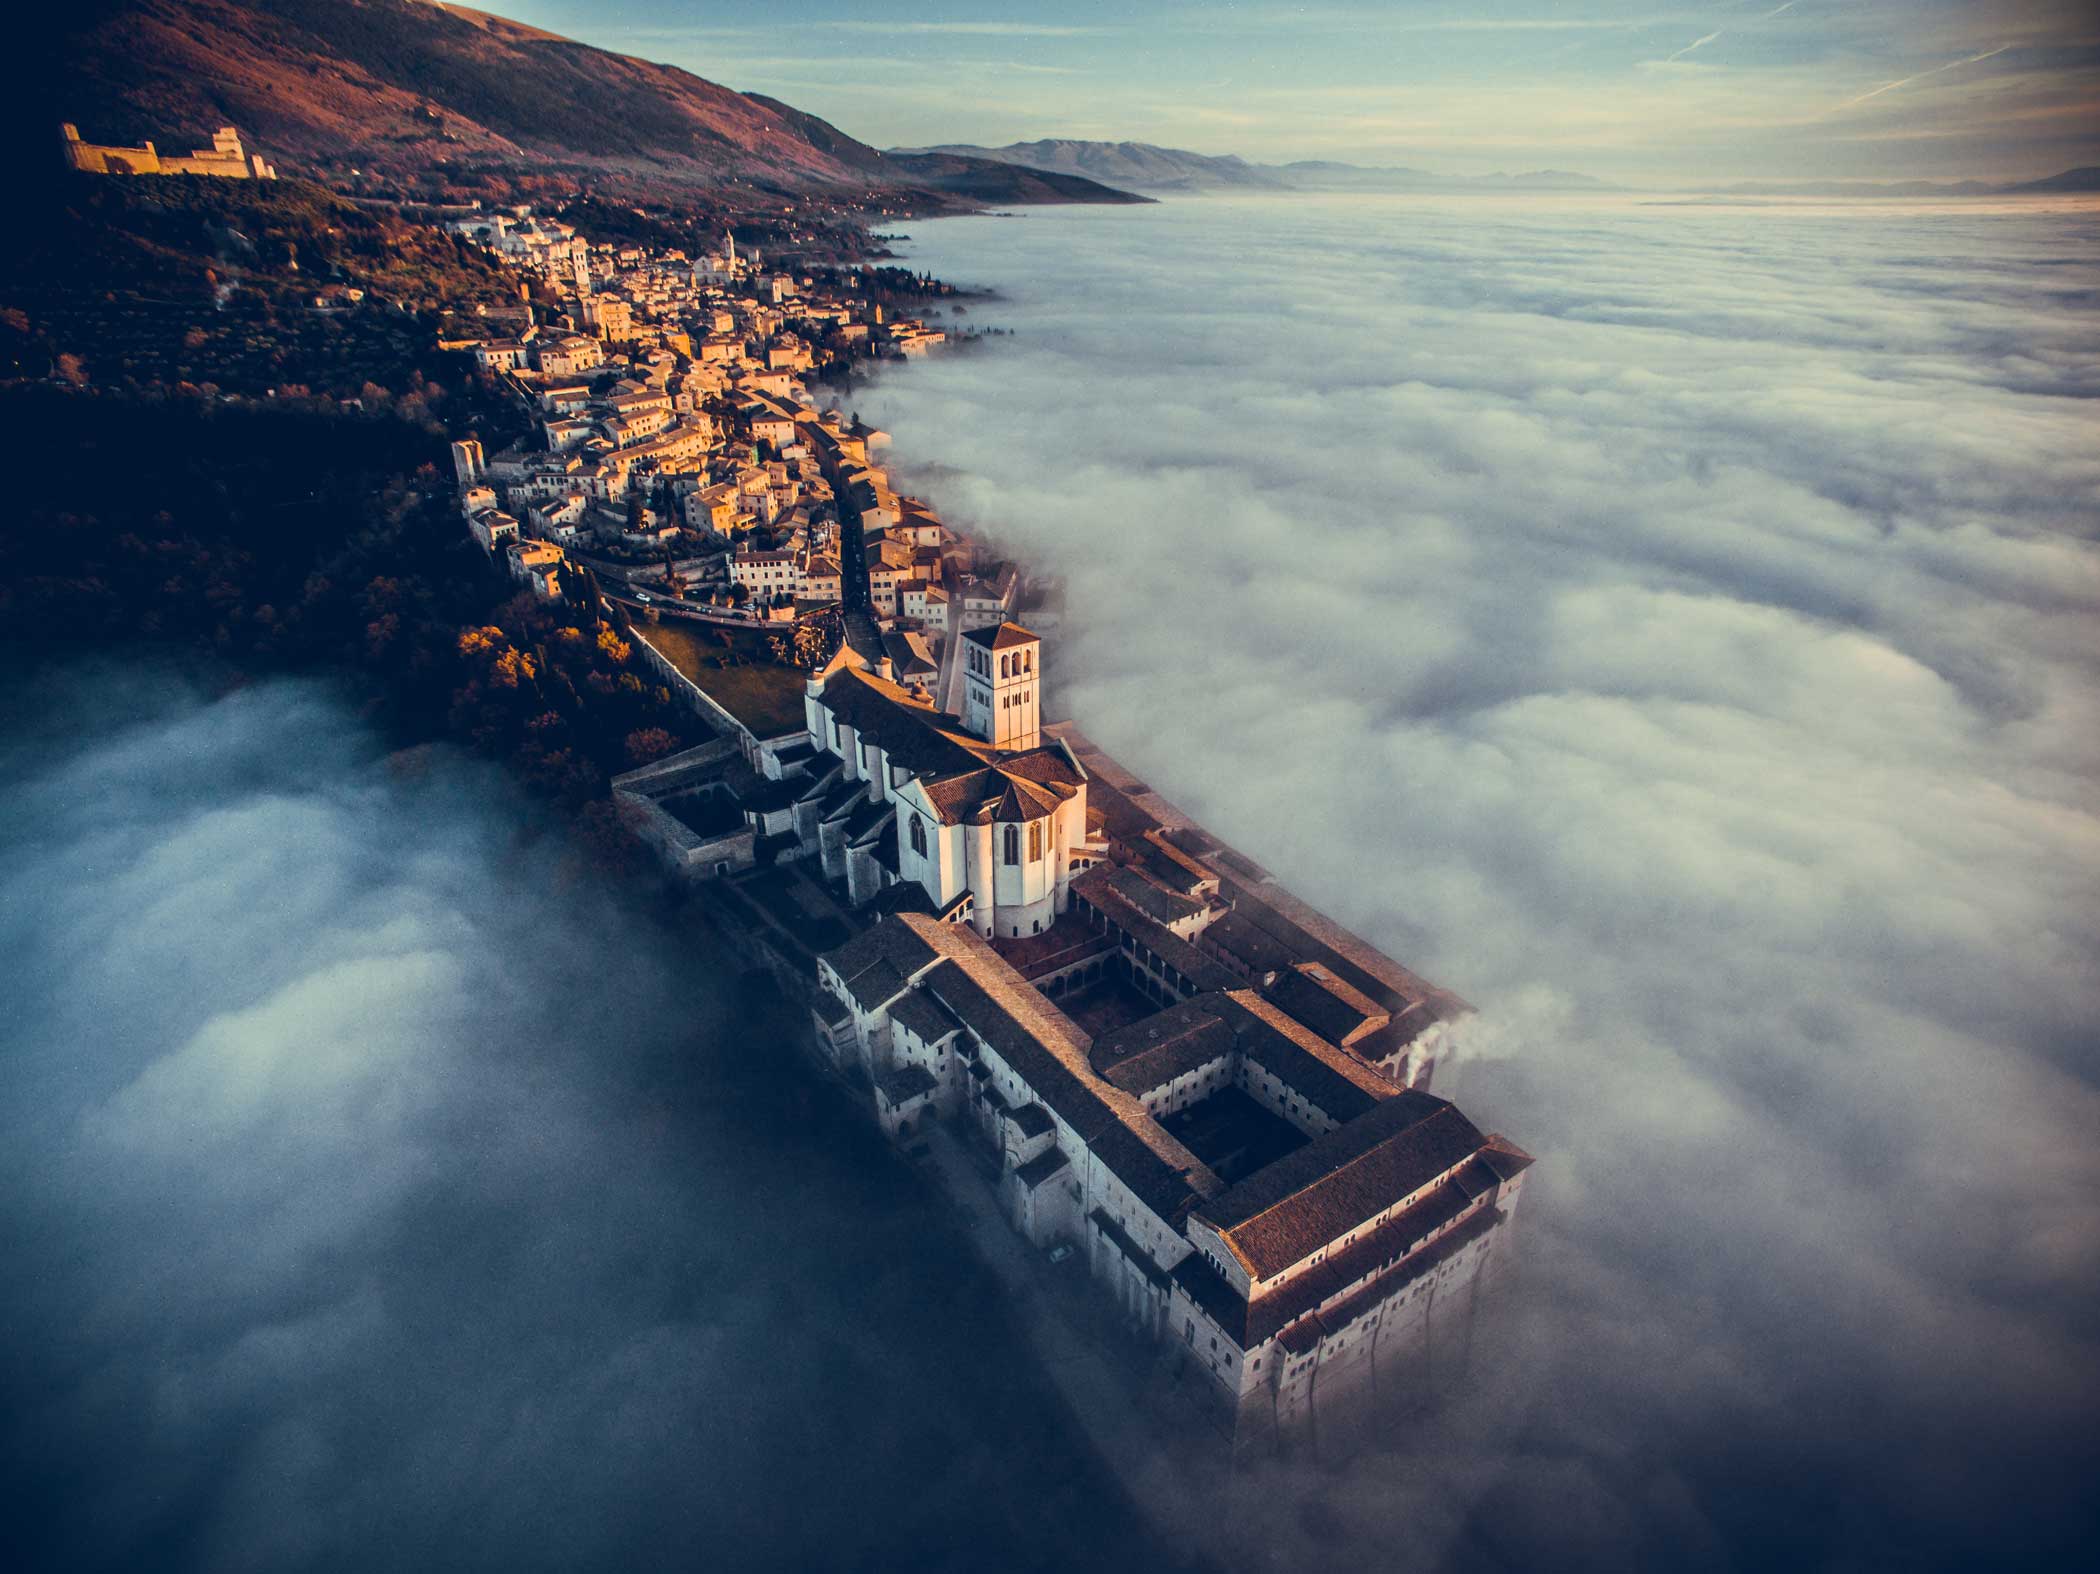 "...after the
                      drone came out from the clouds the view was spectacular and got me completely astonished
                      and, without breathing, I had the time to take some shots before the sun went down and
                      the cloud got higher hiding everything." (Francesco Cattuto. Courtesy of <a href="http://www.dronestagr.am/" target="_blank">Dronestagram</a>)